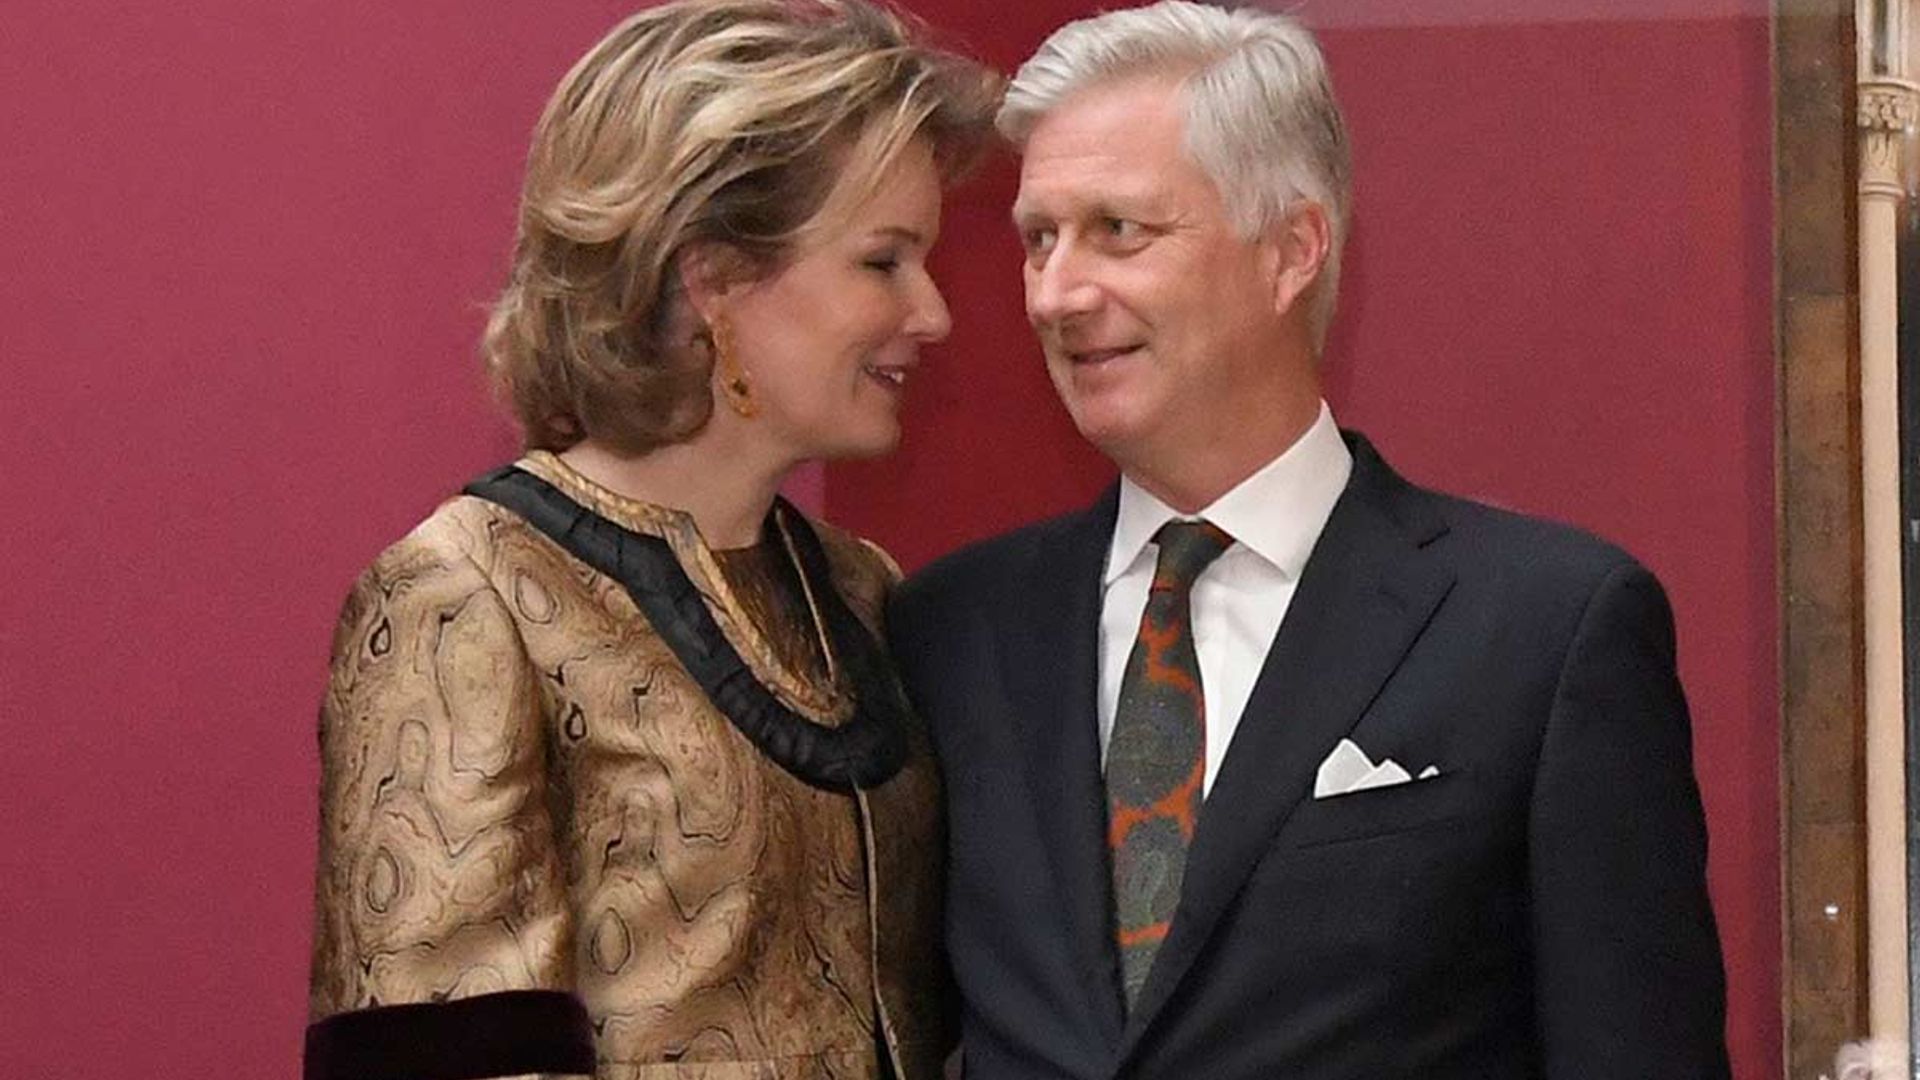 Celebrity daily edit: Queen Mathilde and husband's romantic art tour- video